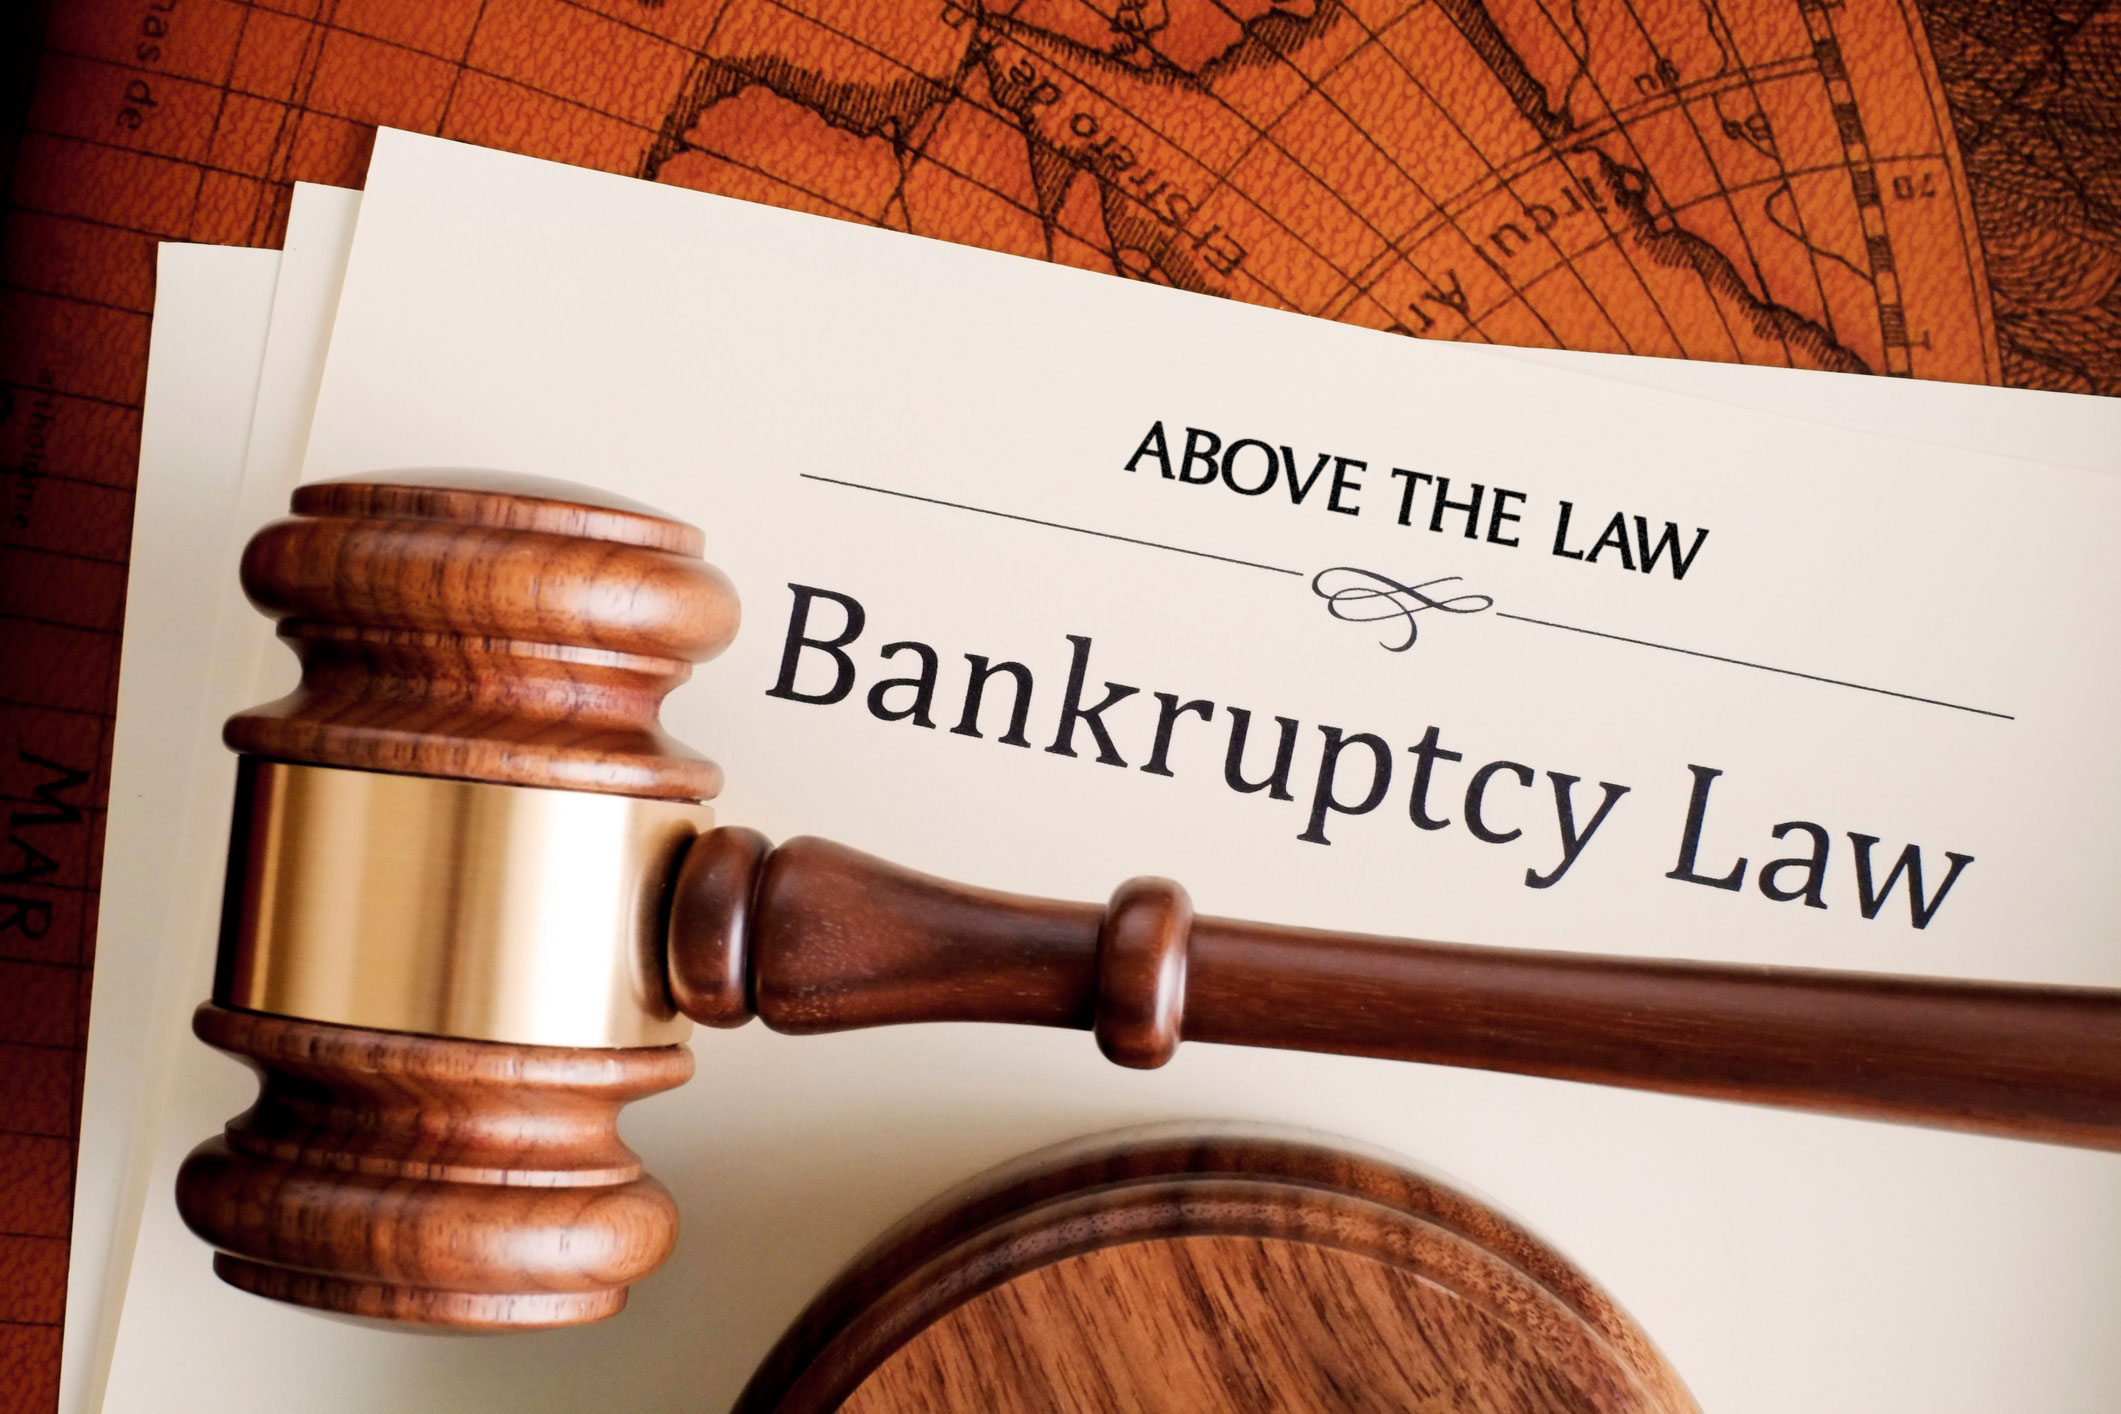 ATL's Top Law Firm Bankruptcy Practices Above the LawAbove the Law